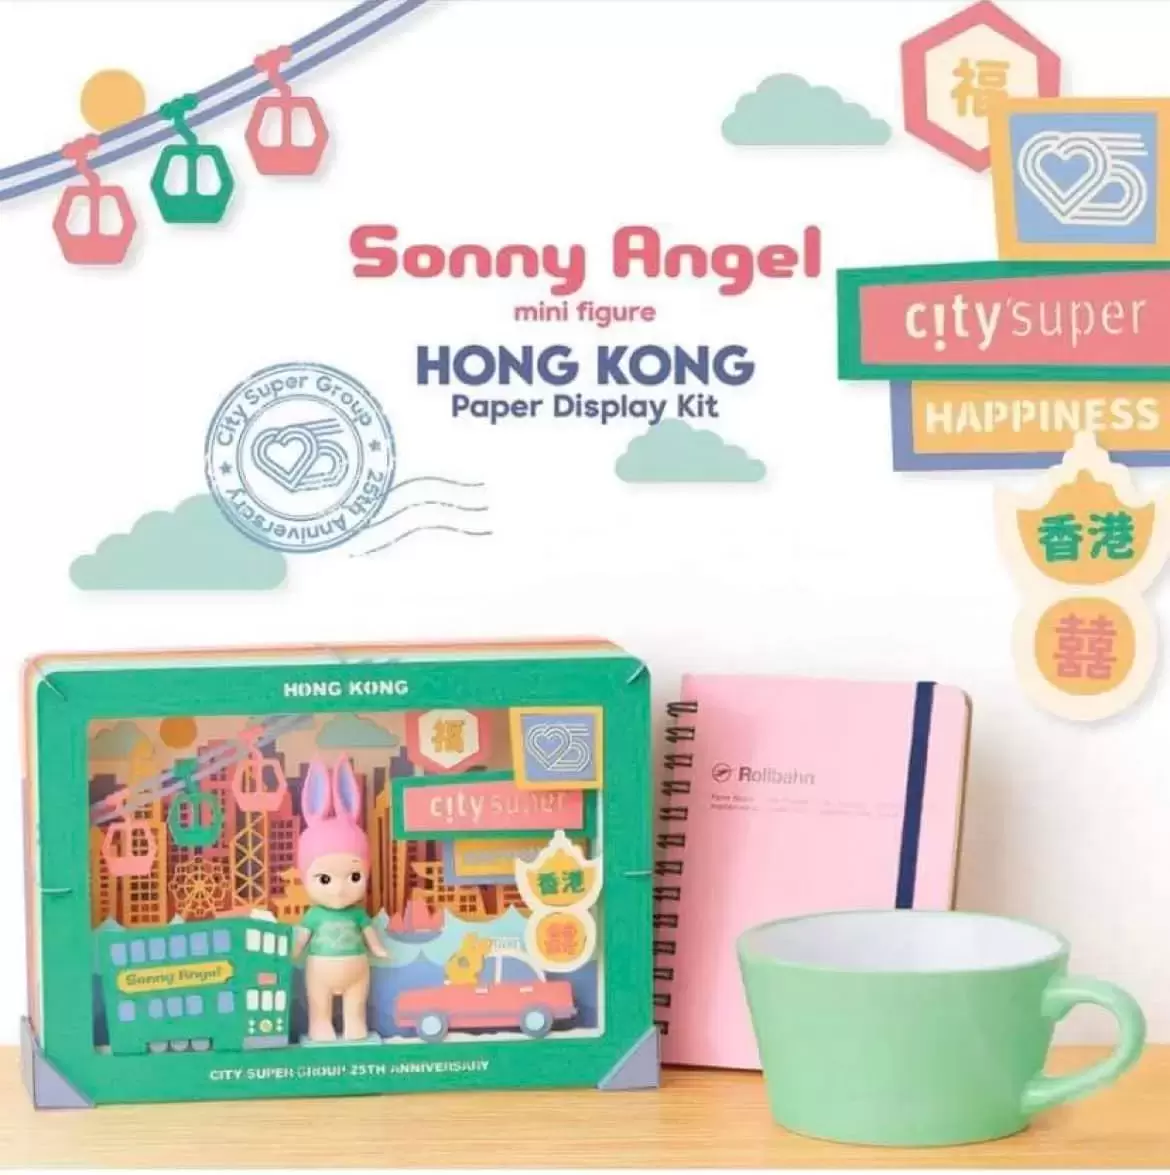 Sonny Angel Editions Limitées et Collaborations - Hong Kong paper display kit